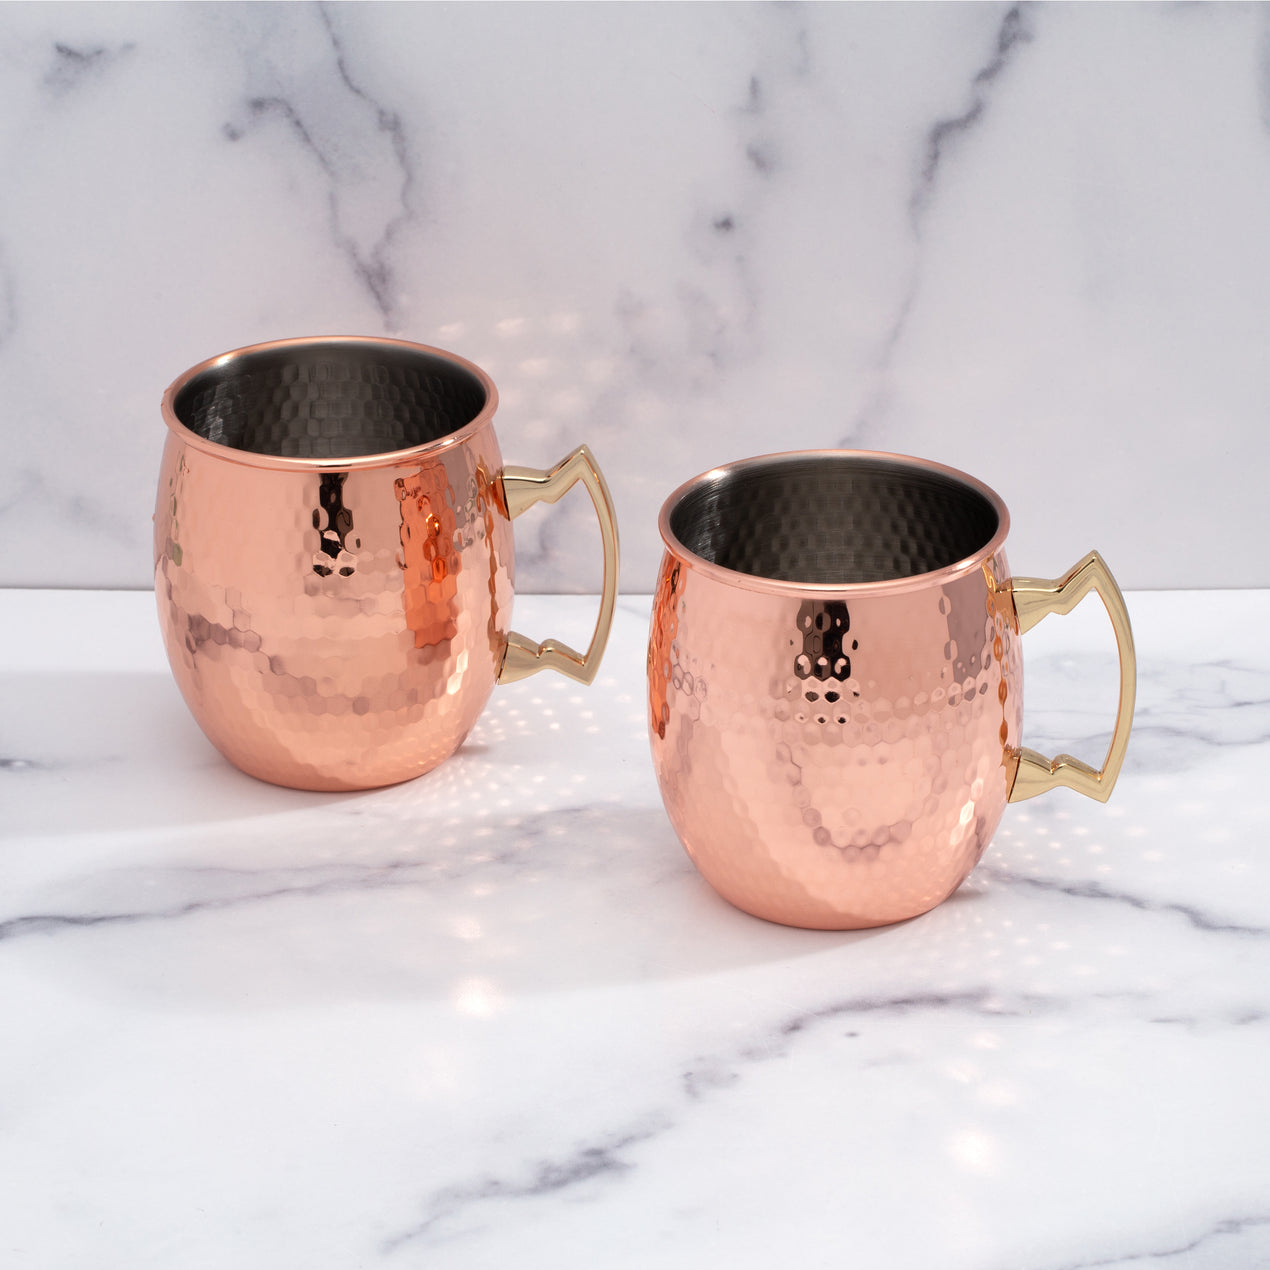 20 Oz Hammered Copper Moscow Mule Mugs, Set Of 2 – Cambridge Silversmiths®